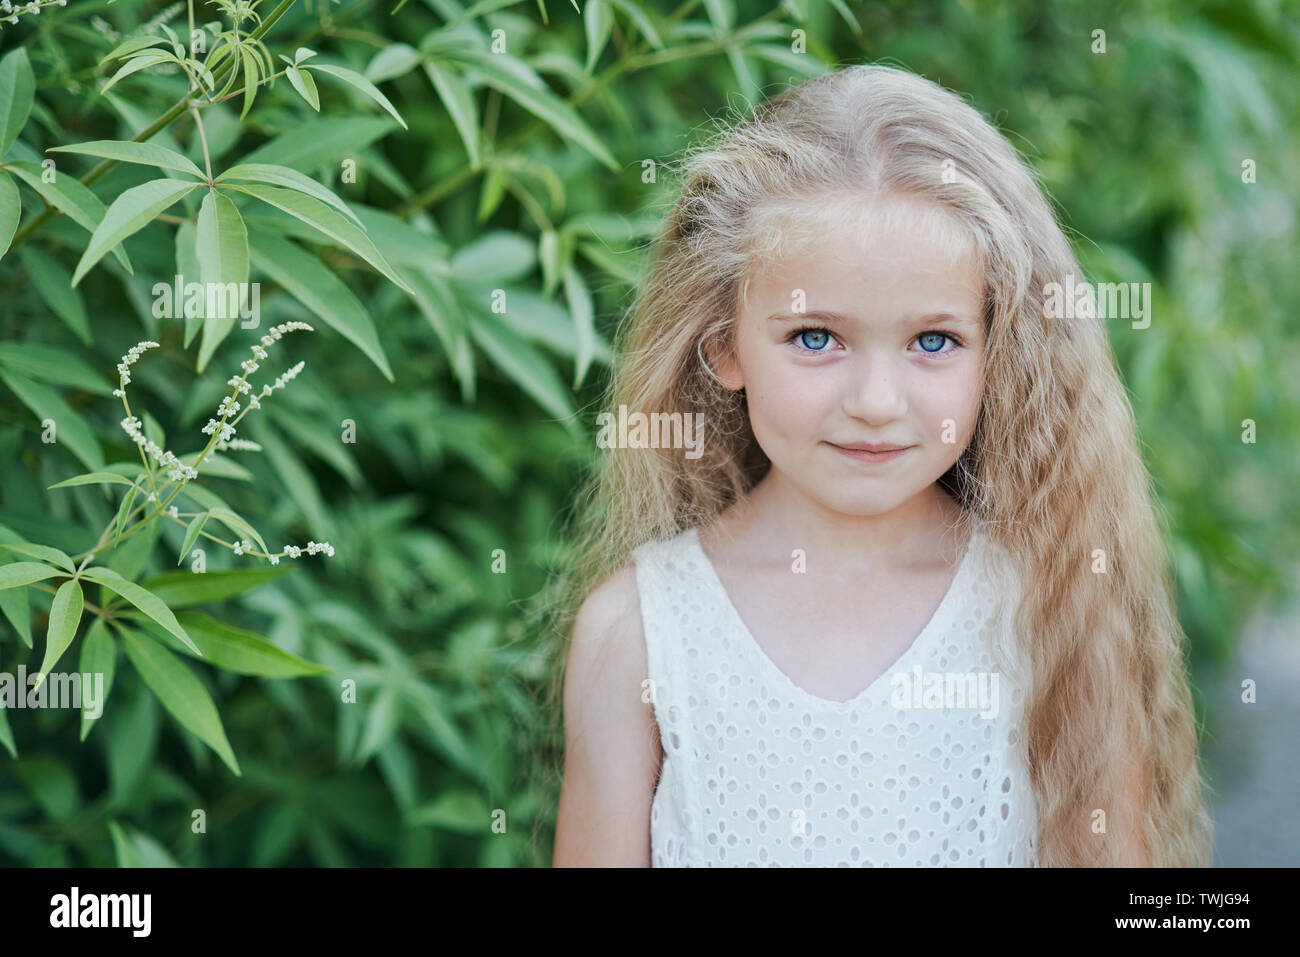 Close Up Portrait Of Beautiful Little Girl With Blonde Long Hair